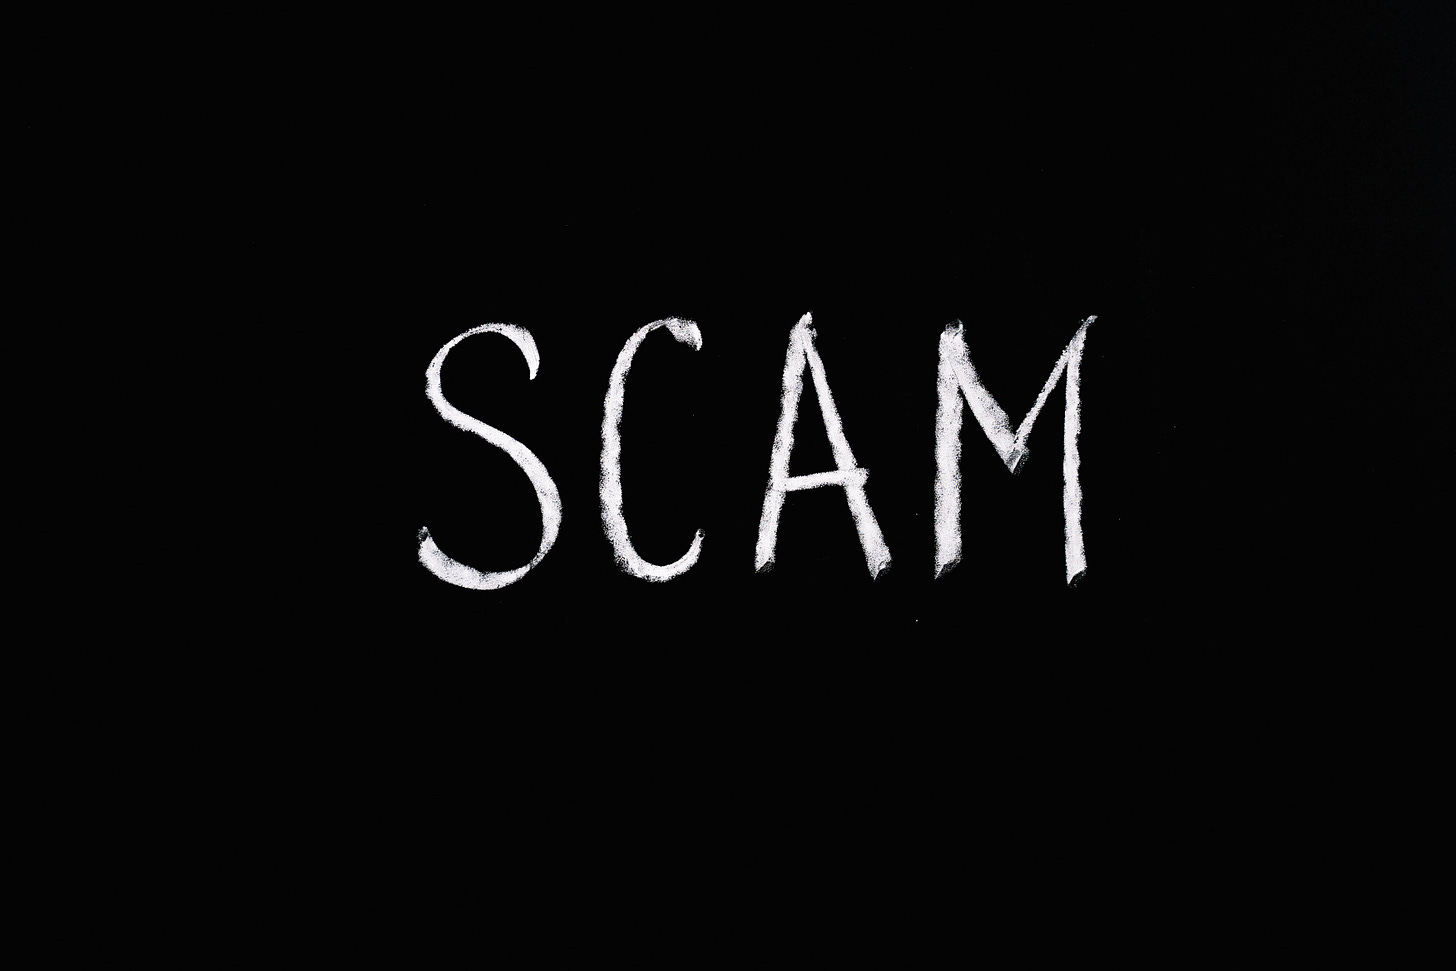 The word “SCAM” is written in white chalk on a black background.